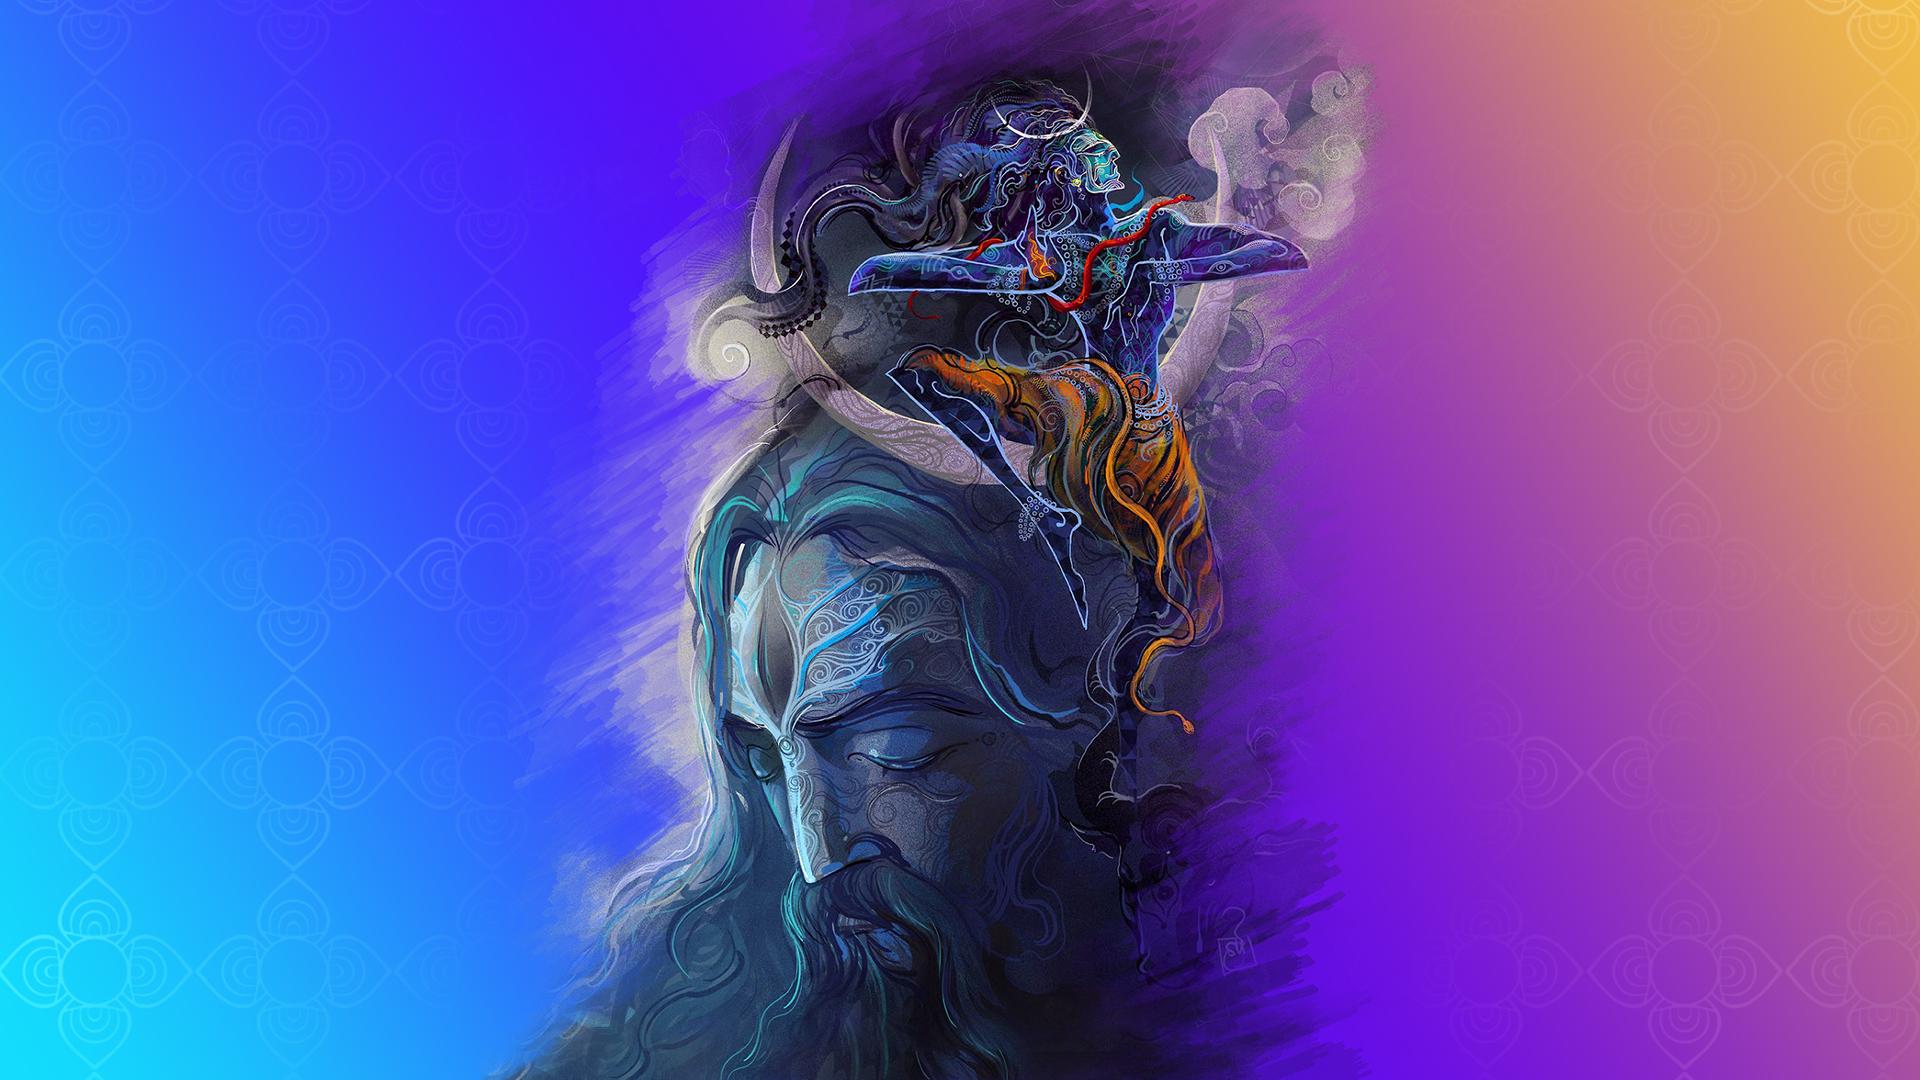 Mahadev wallpapers - Shiv hd wallpaper for Android - APK Download